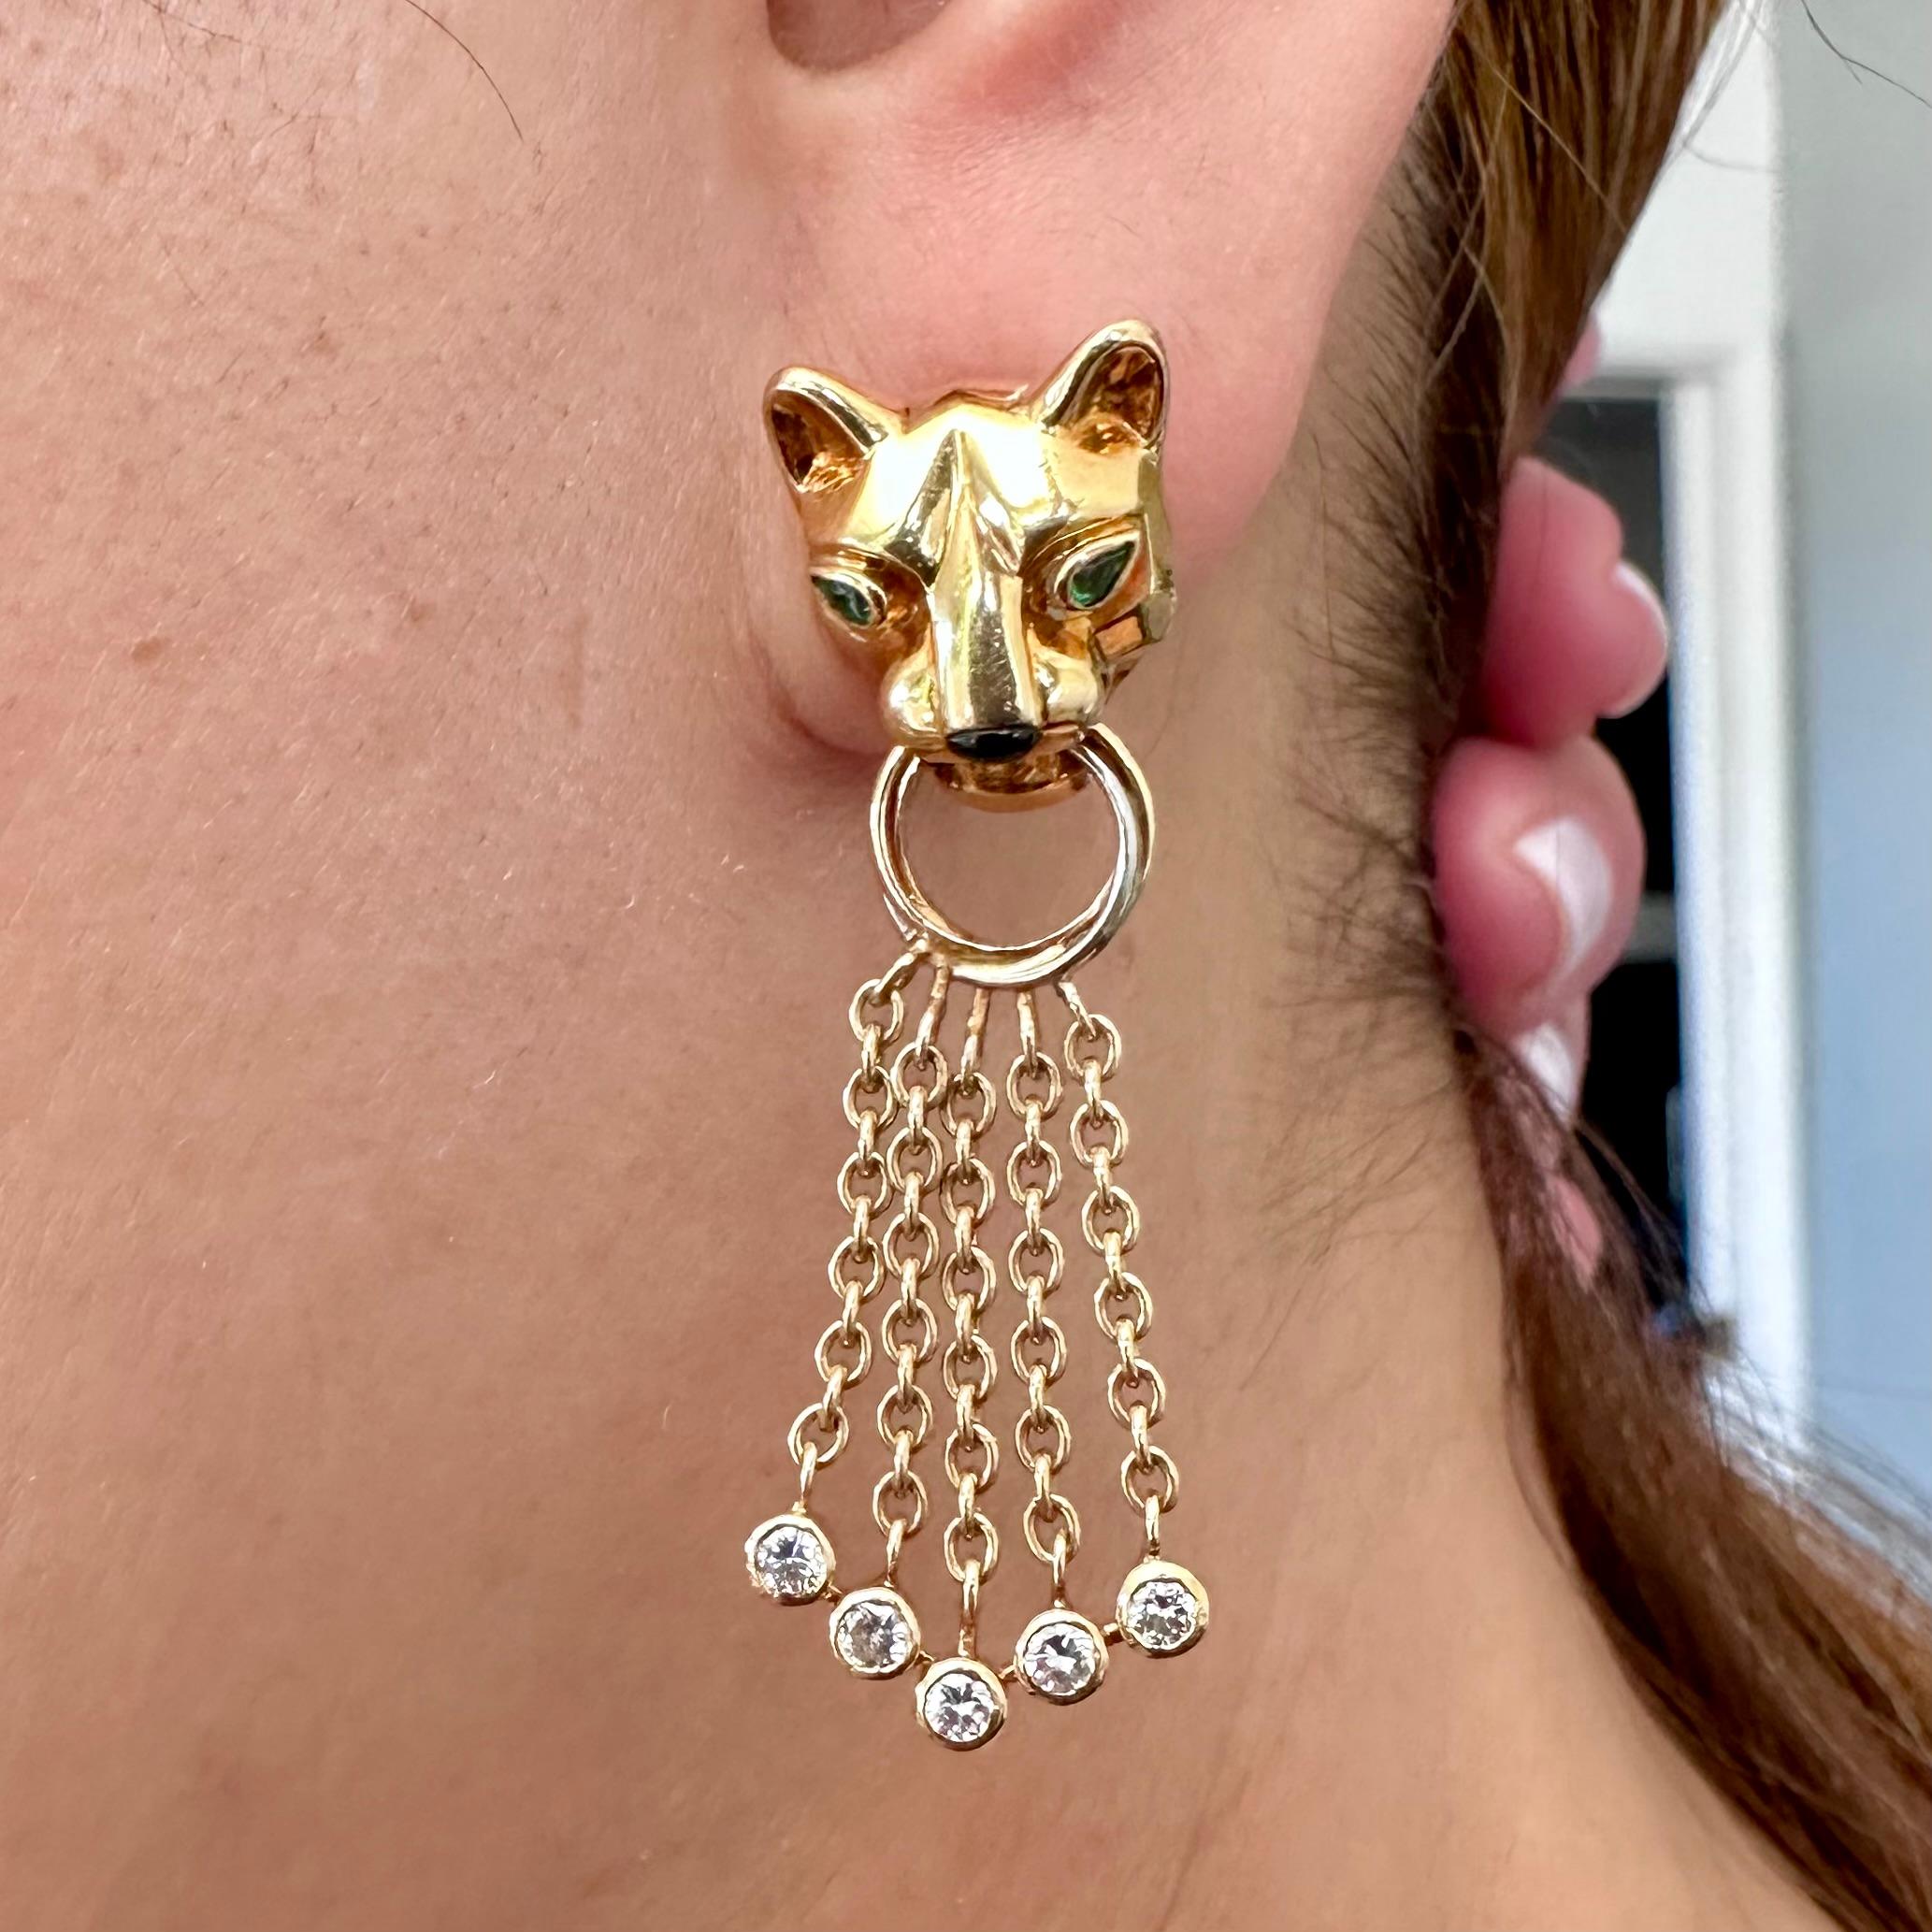 Cartier Diamond Panther Collection Earrings
Panthere's Heads Holding 18k Circles Supporting 5 Chains in a Chevron Design with Bezel set Round Brilliant Cut Diamond 
Combined Diamond, Emerald, Onyx and Yellow Gold crafted into ‘Panthère’ Earrings,